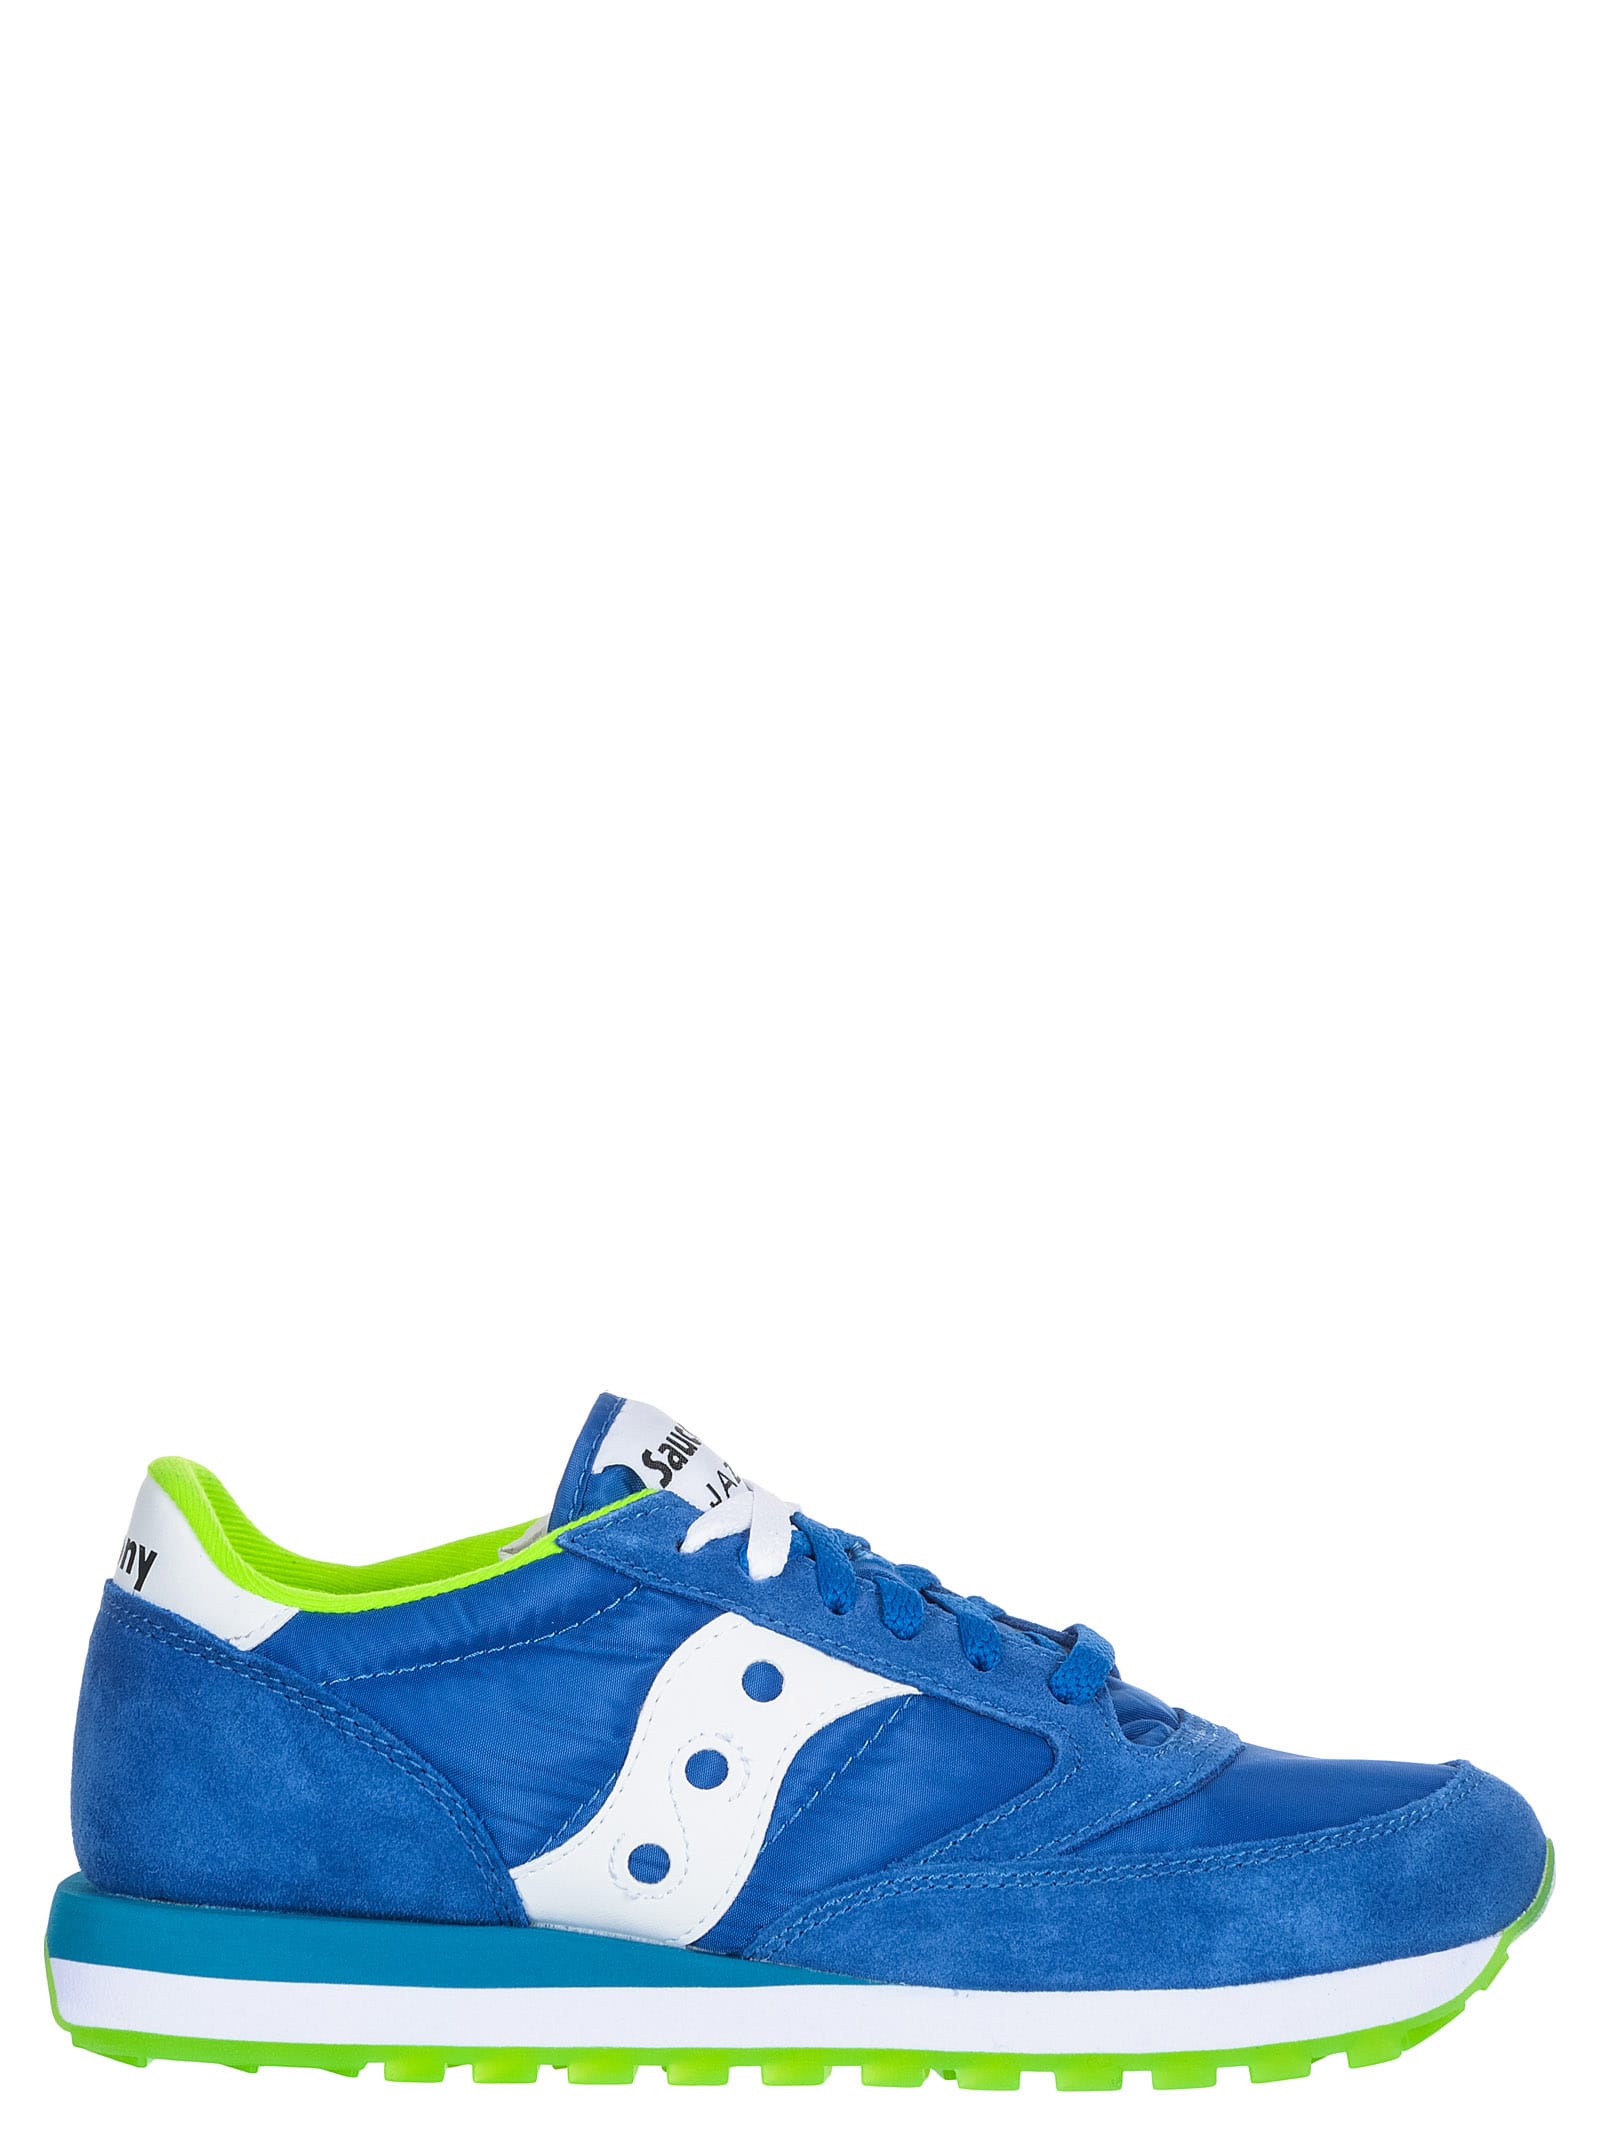 Saucony Saucony Jazz Blue/lime Sneakers 